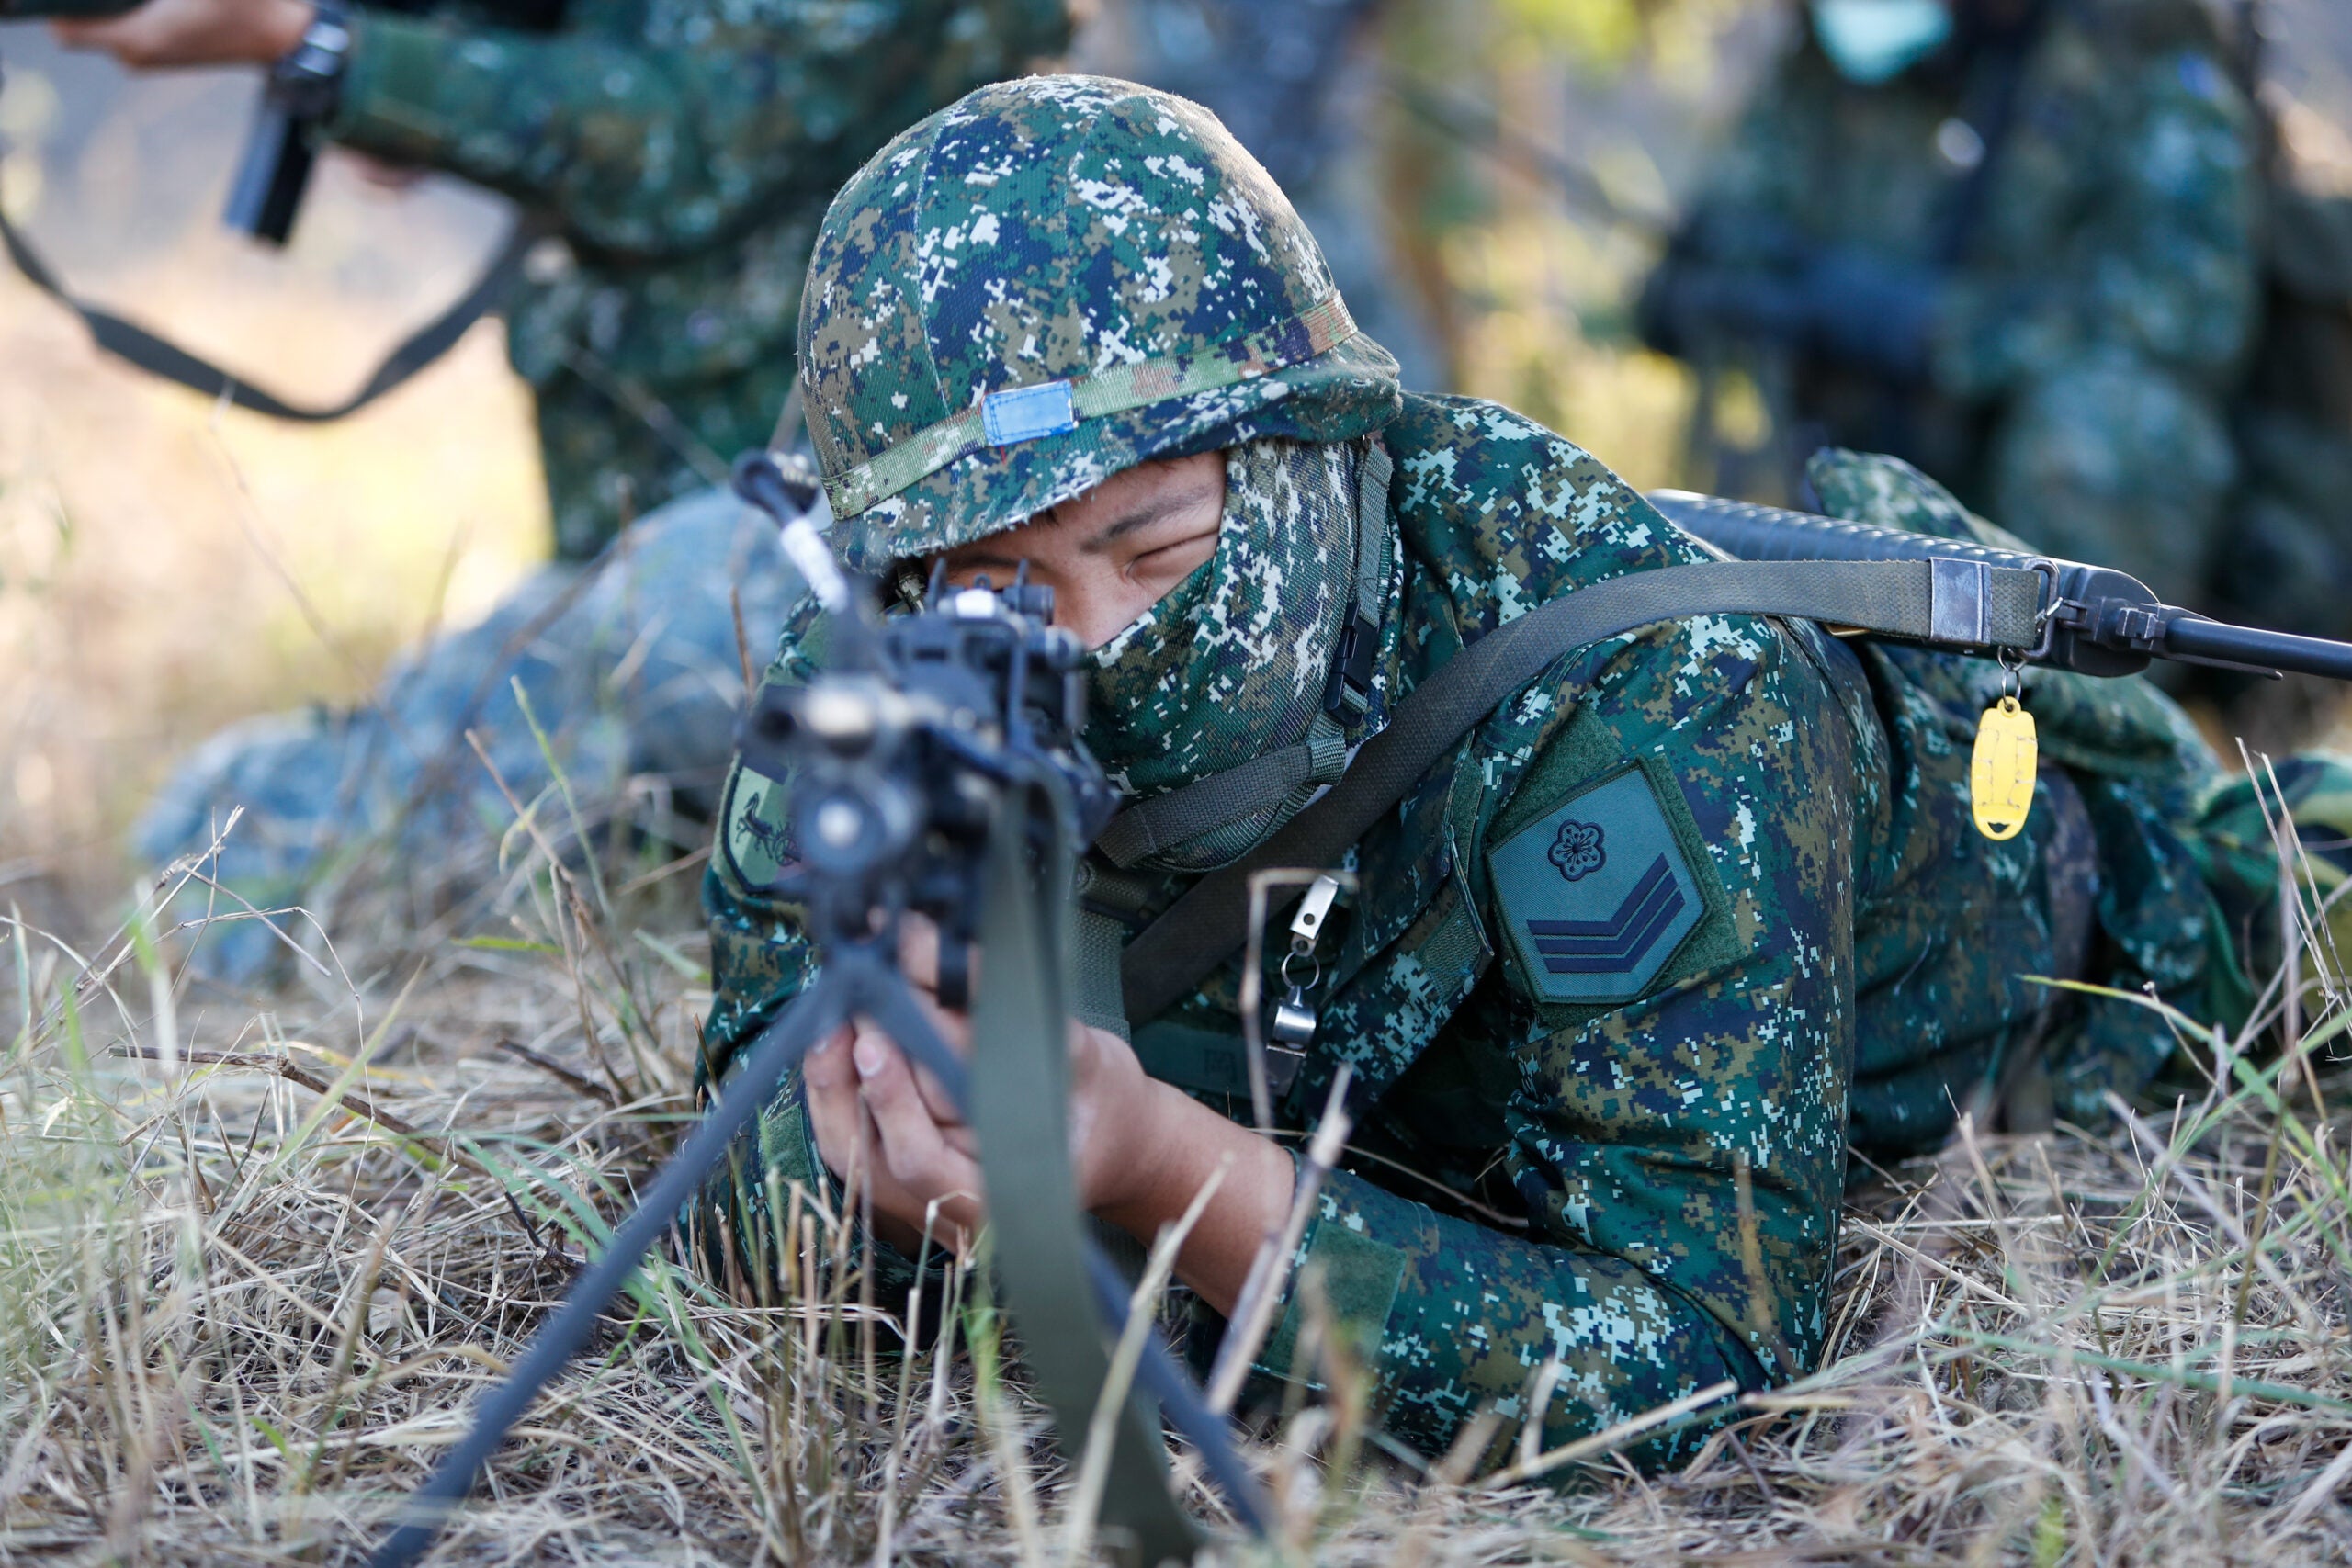 Soldiers holding machine guns and grenade launchers  in position , during a shore defense operation as part of a military exercise simulating the defense against the intrusion of Chinese military, amid rising tensions between Taipei and Beijing, in Tainan, Taiwan, 11 November 2021. The self governing island has been receiving increasing assistance from the US while building better relations with the UK, Australia, France and other European countries including Lithuania, Czech Republic, Poland and so on. (Photo by Ceng Shou Yi/NurPhoto via Getty Images)